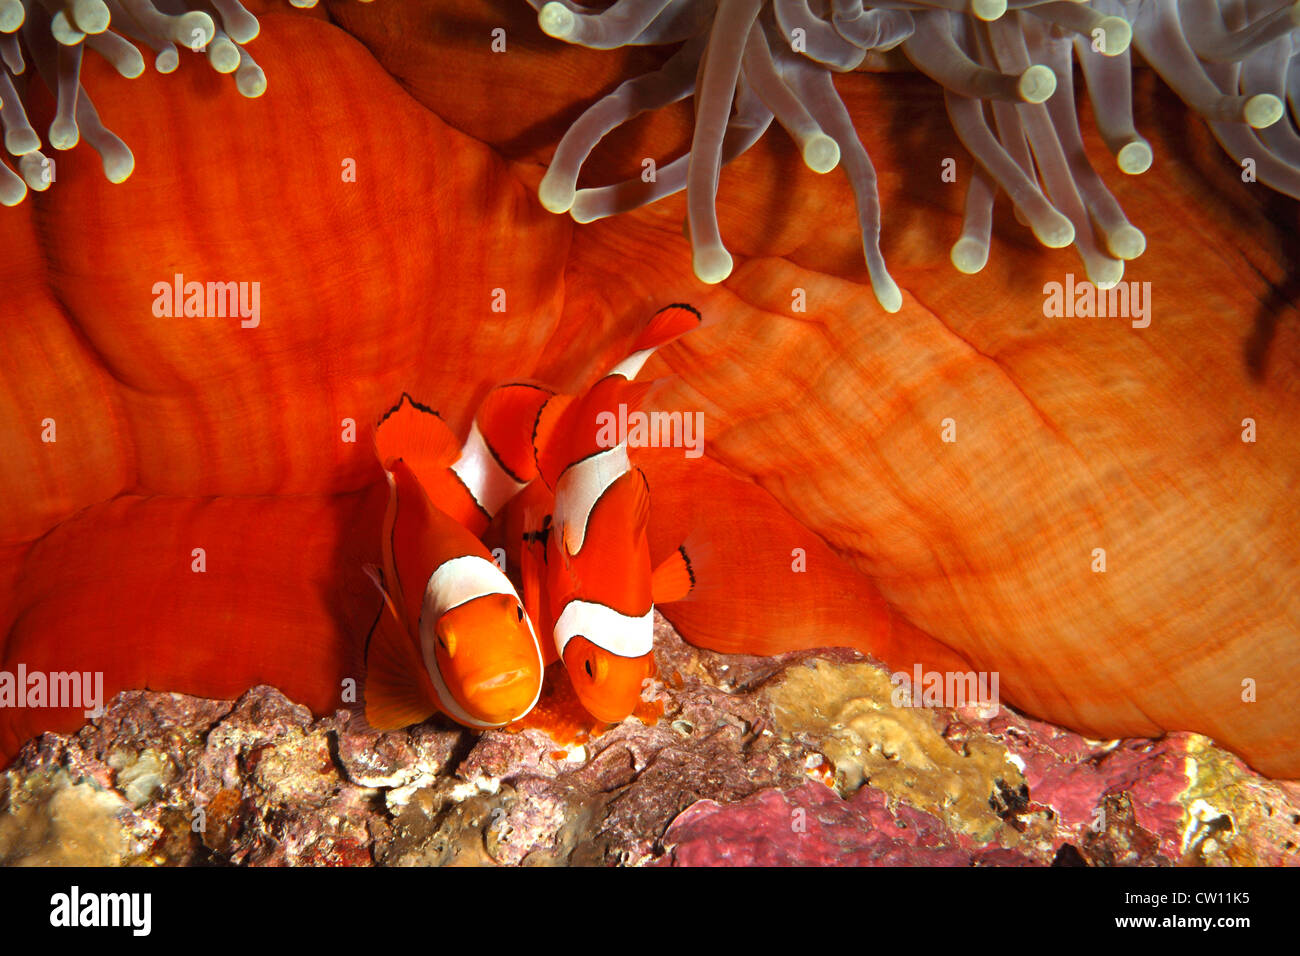 Pair of Clown Anemonefish, Amphiprion percula, tending eggs laid at base of the host Magnificent Anemone, Heteractis magnifica. Stock Photo